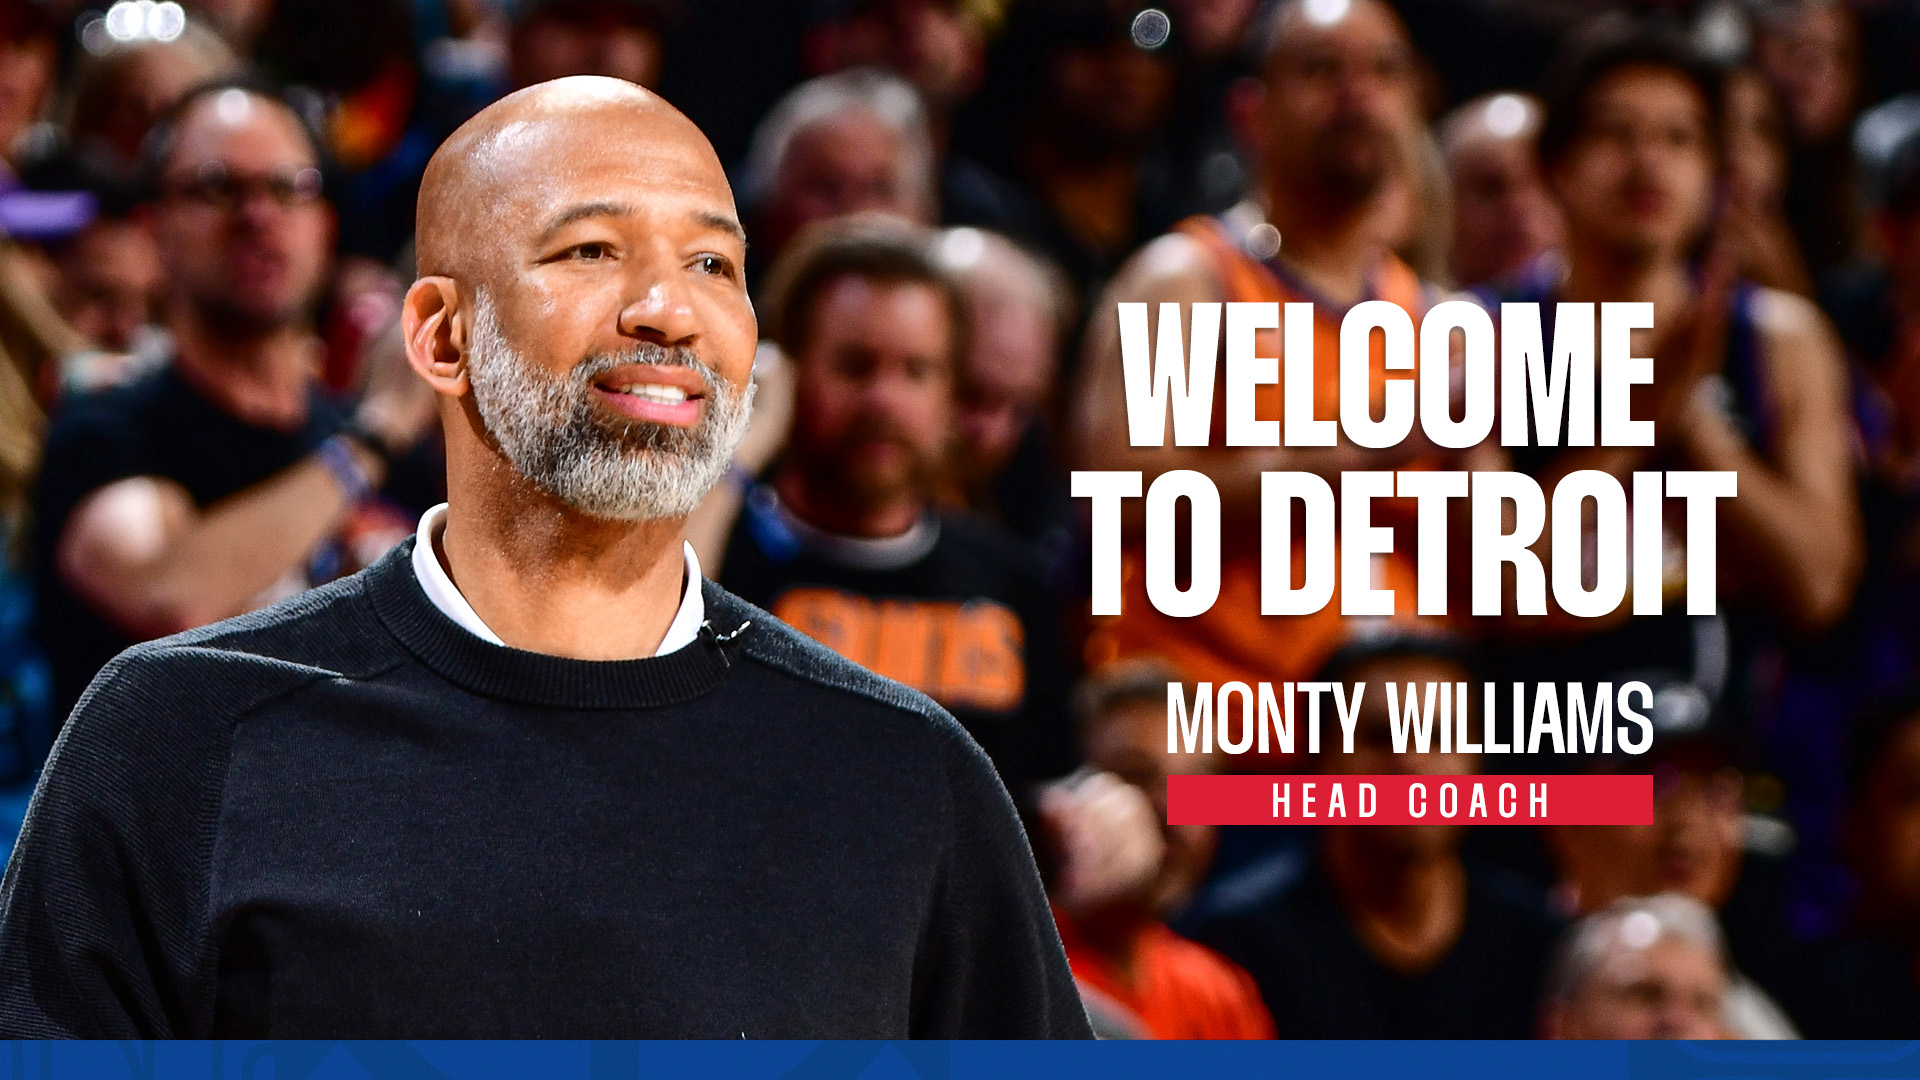 Detroit Pistons, Tom Gores announce hiring of new head coach Monty Williams, who will nurture ‘culture of growth, development and inspiration’